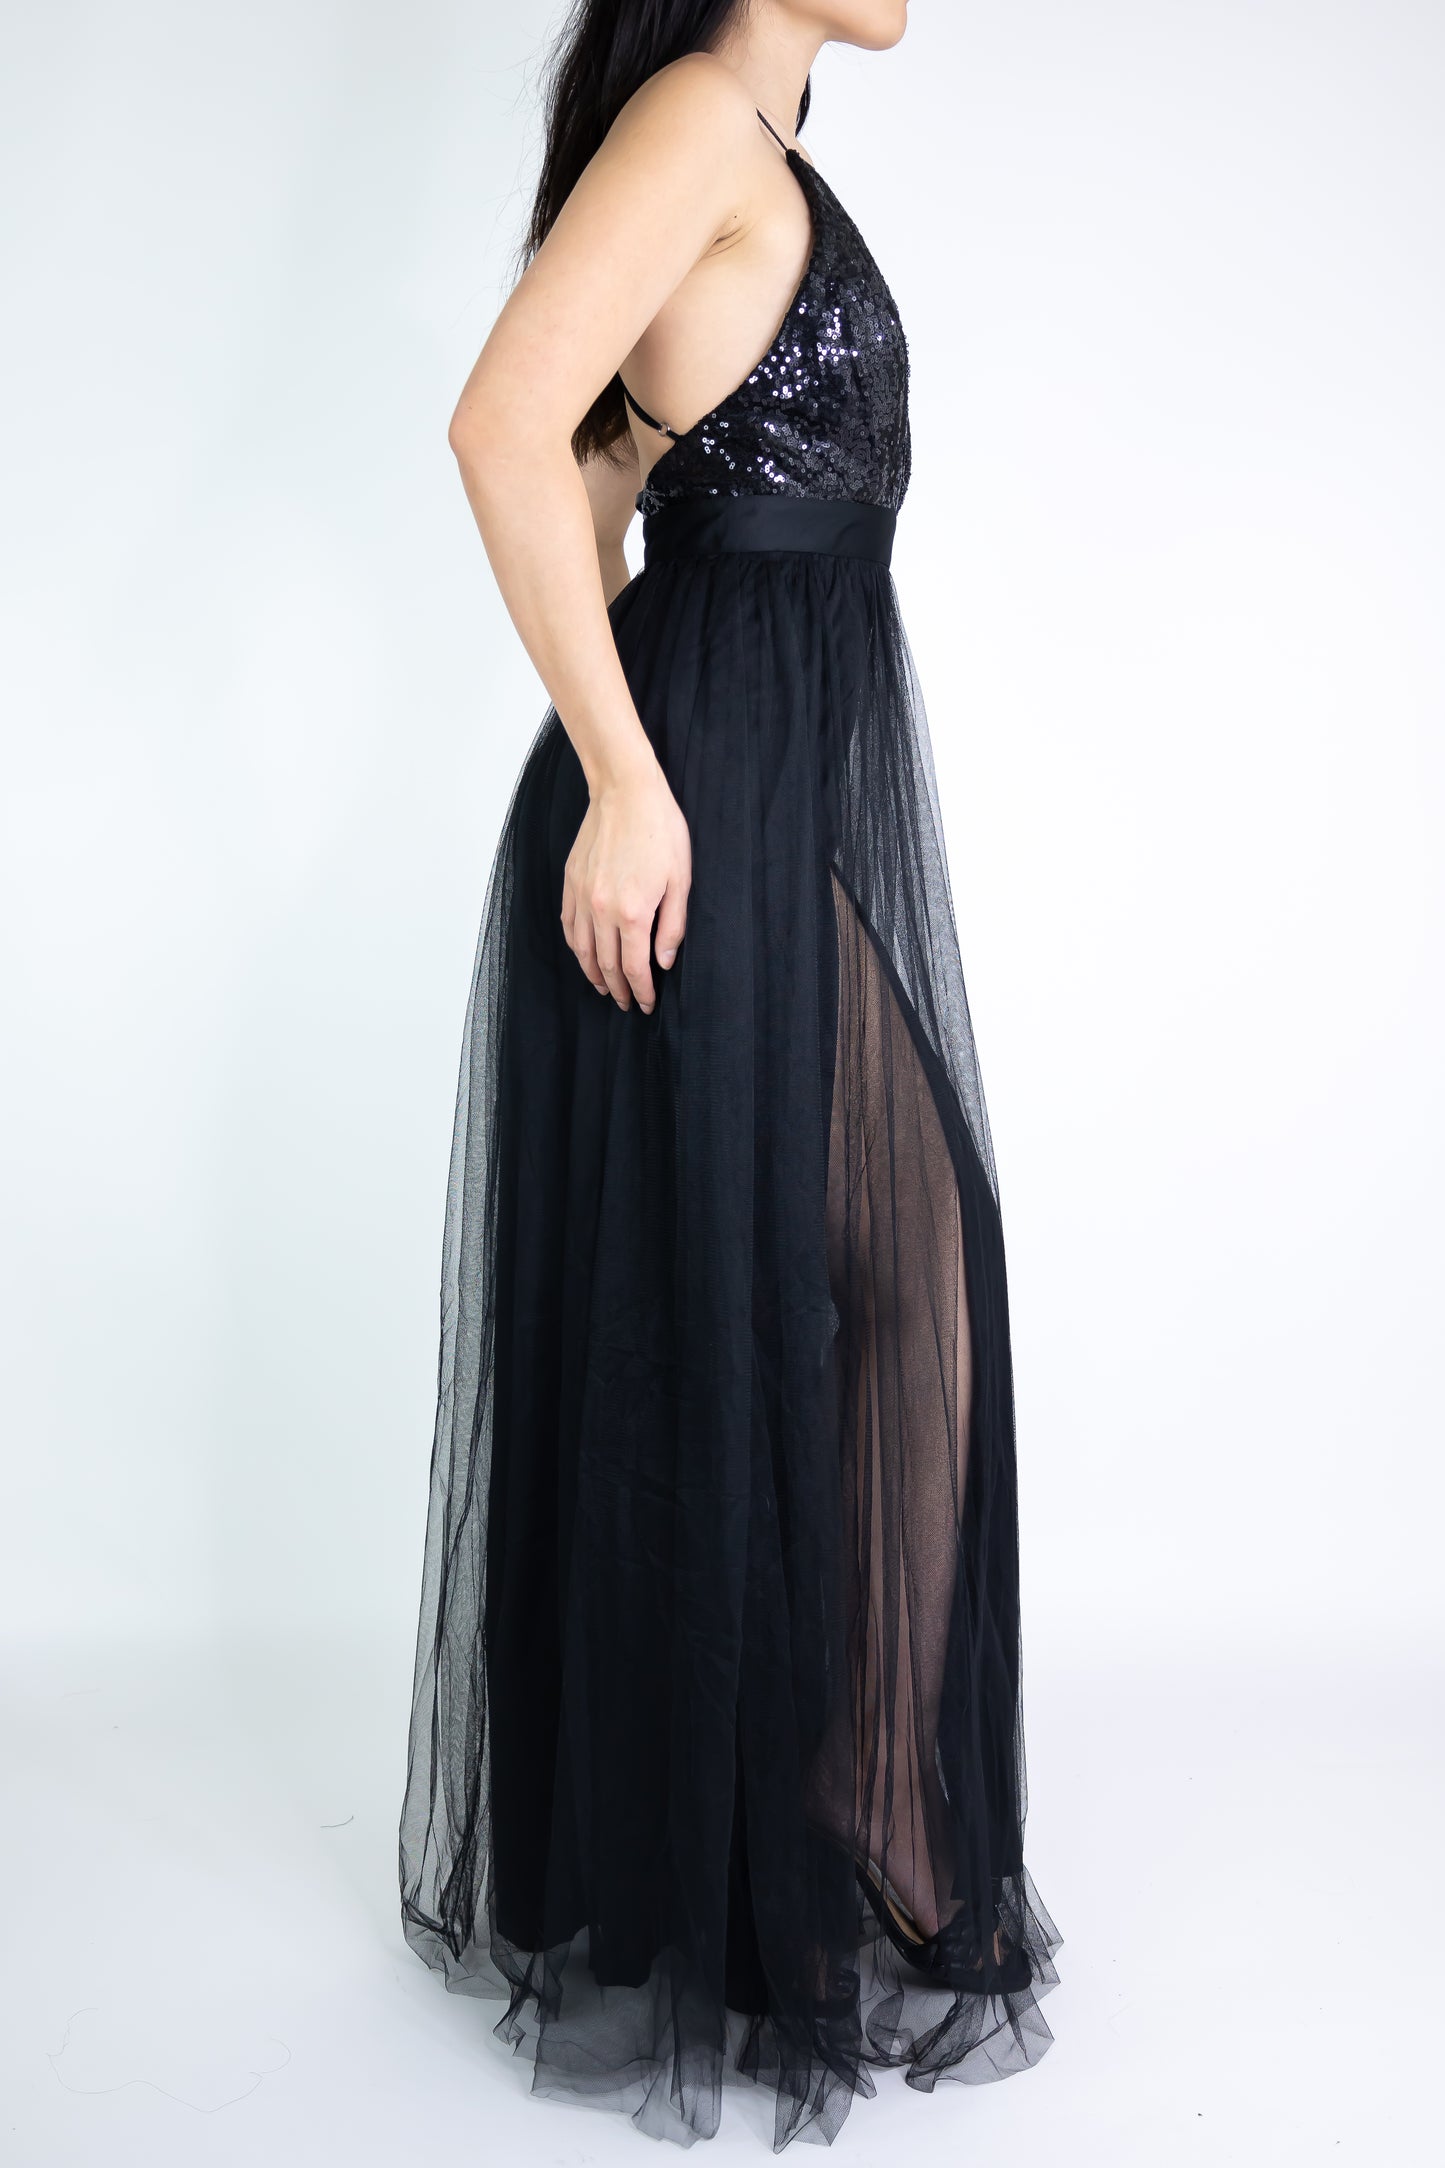 Maxi formal dresses & gowns in black and blue